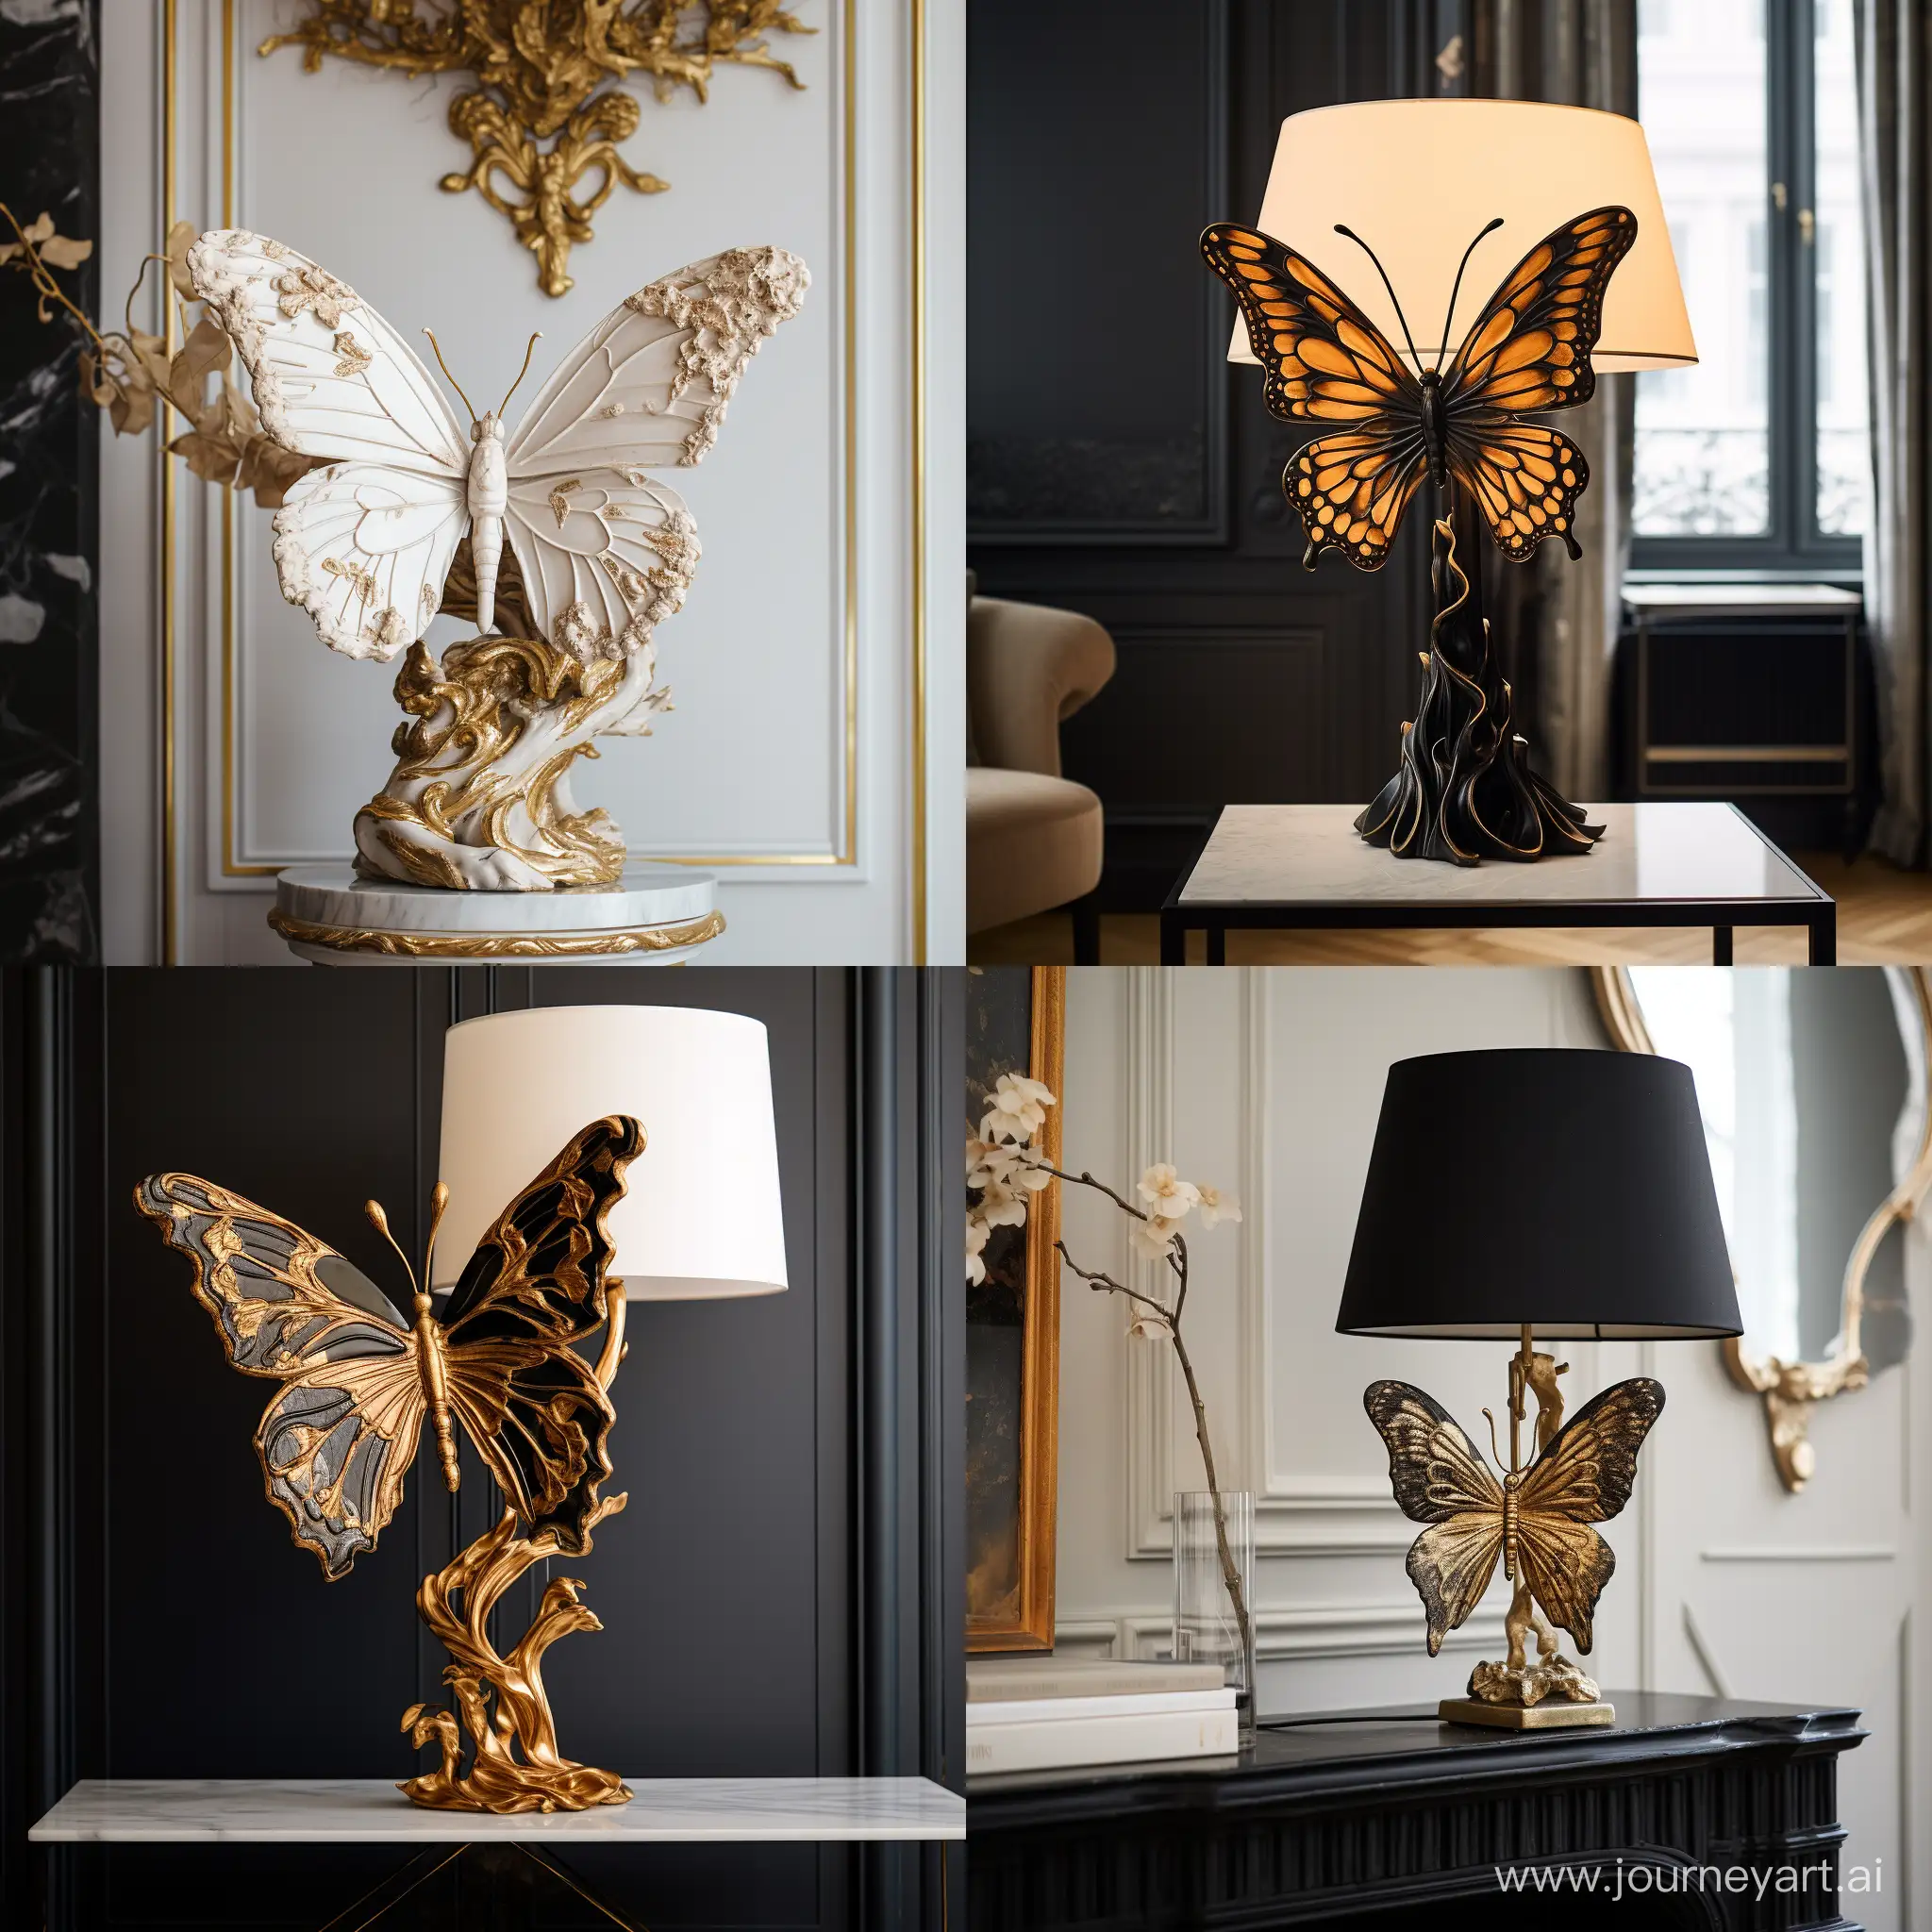 A sculpture of a butterfly landed on a delicate European-style lamp